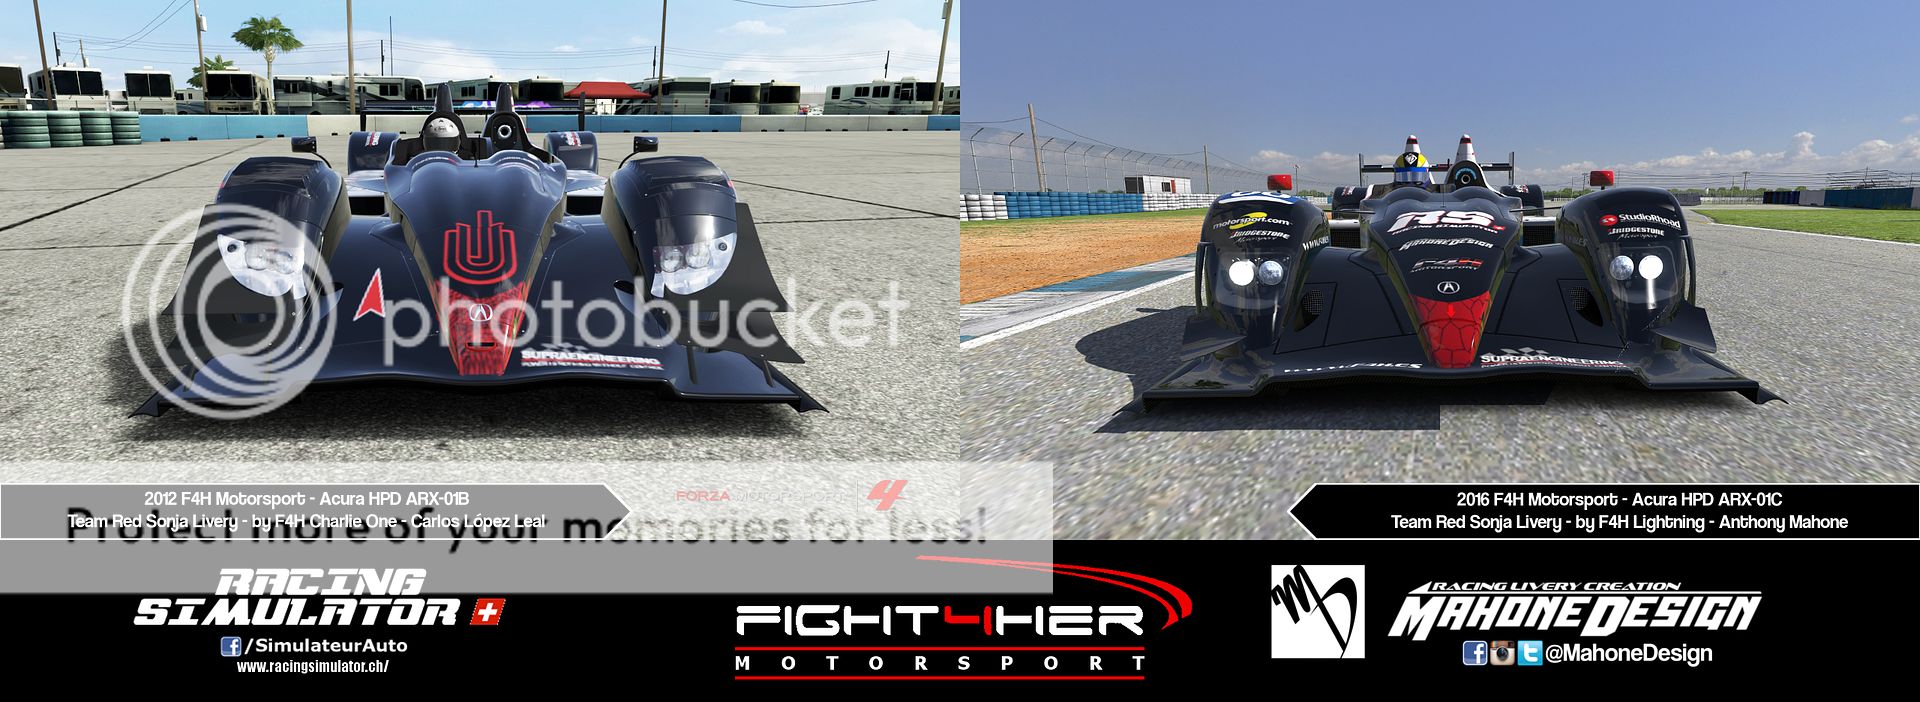 MahoneDesign - Racecar Livery Creation F4H%20Red%20Sonja%20Front%20Side